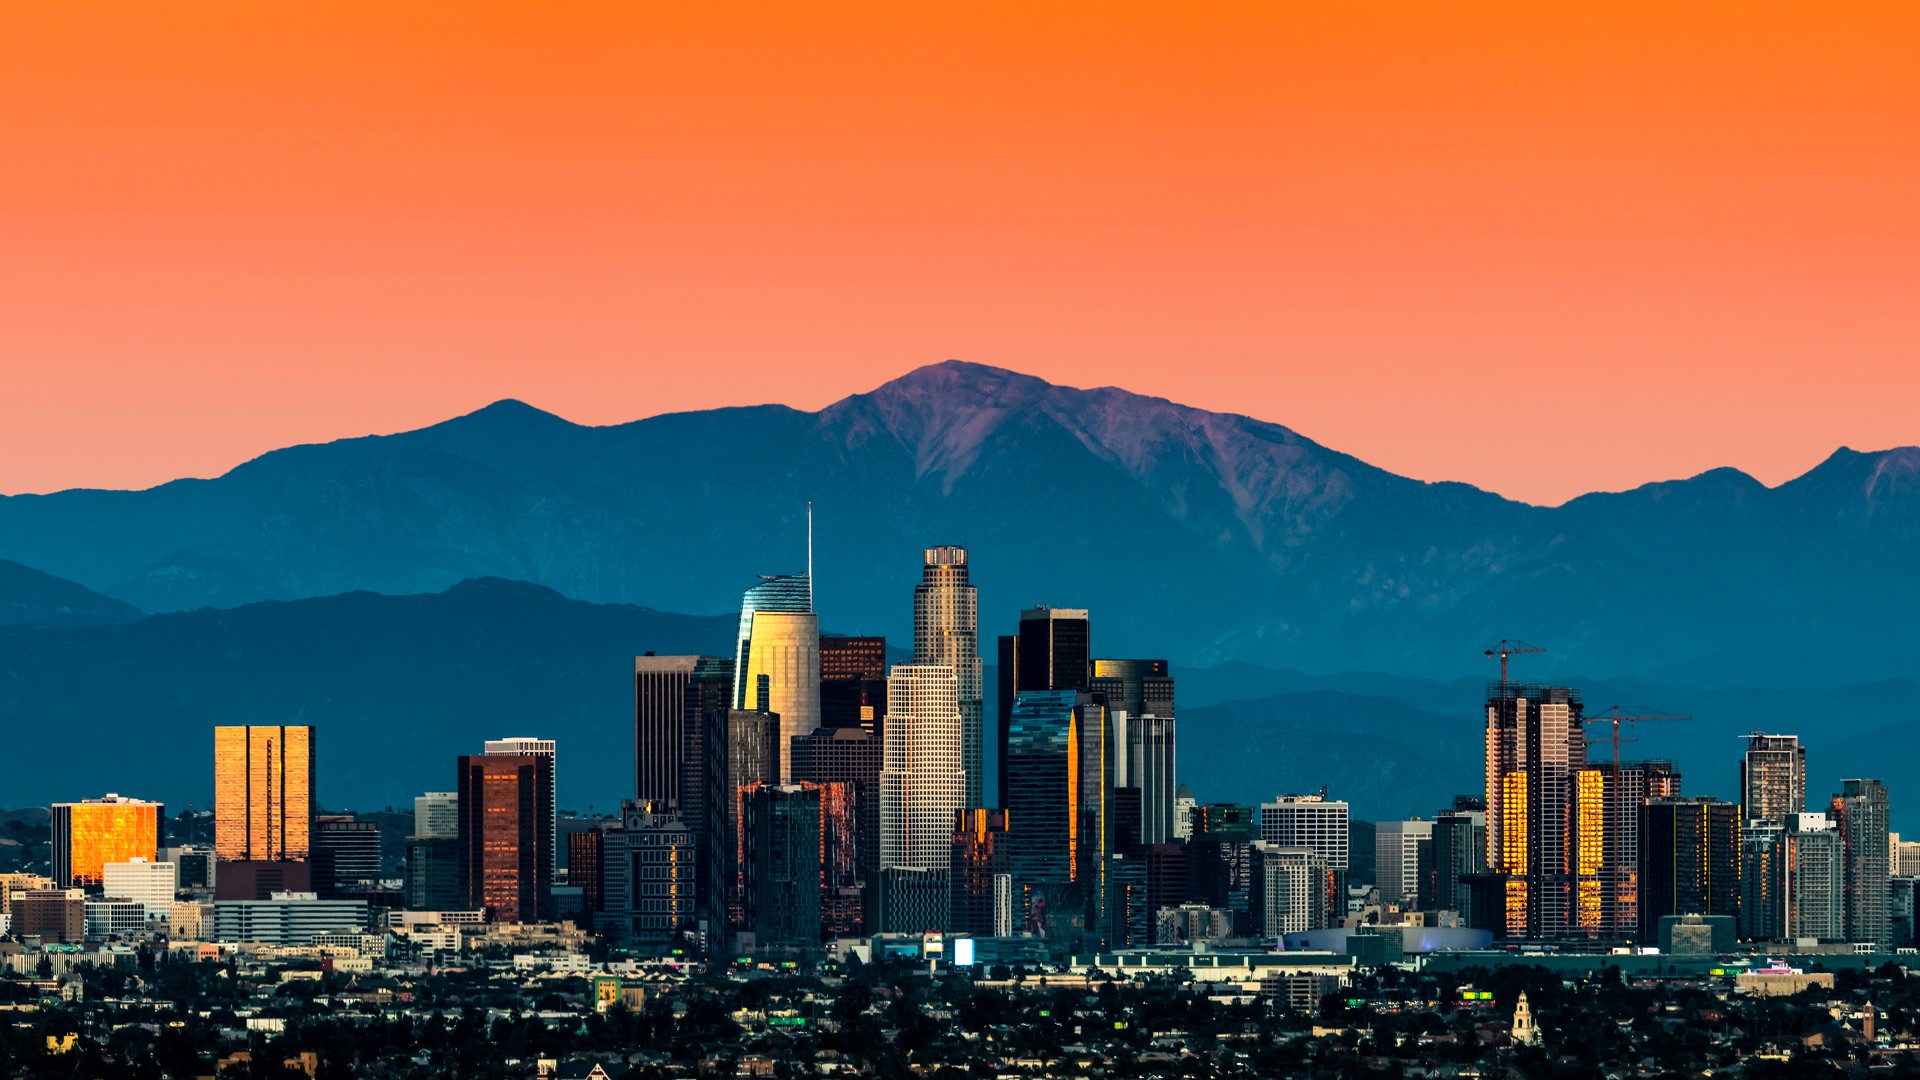 Los Angeles is one of the most expensive cities to live in the world